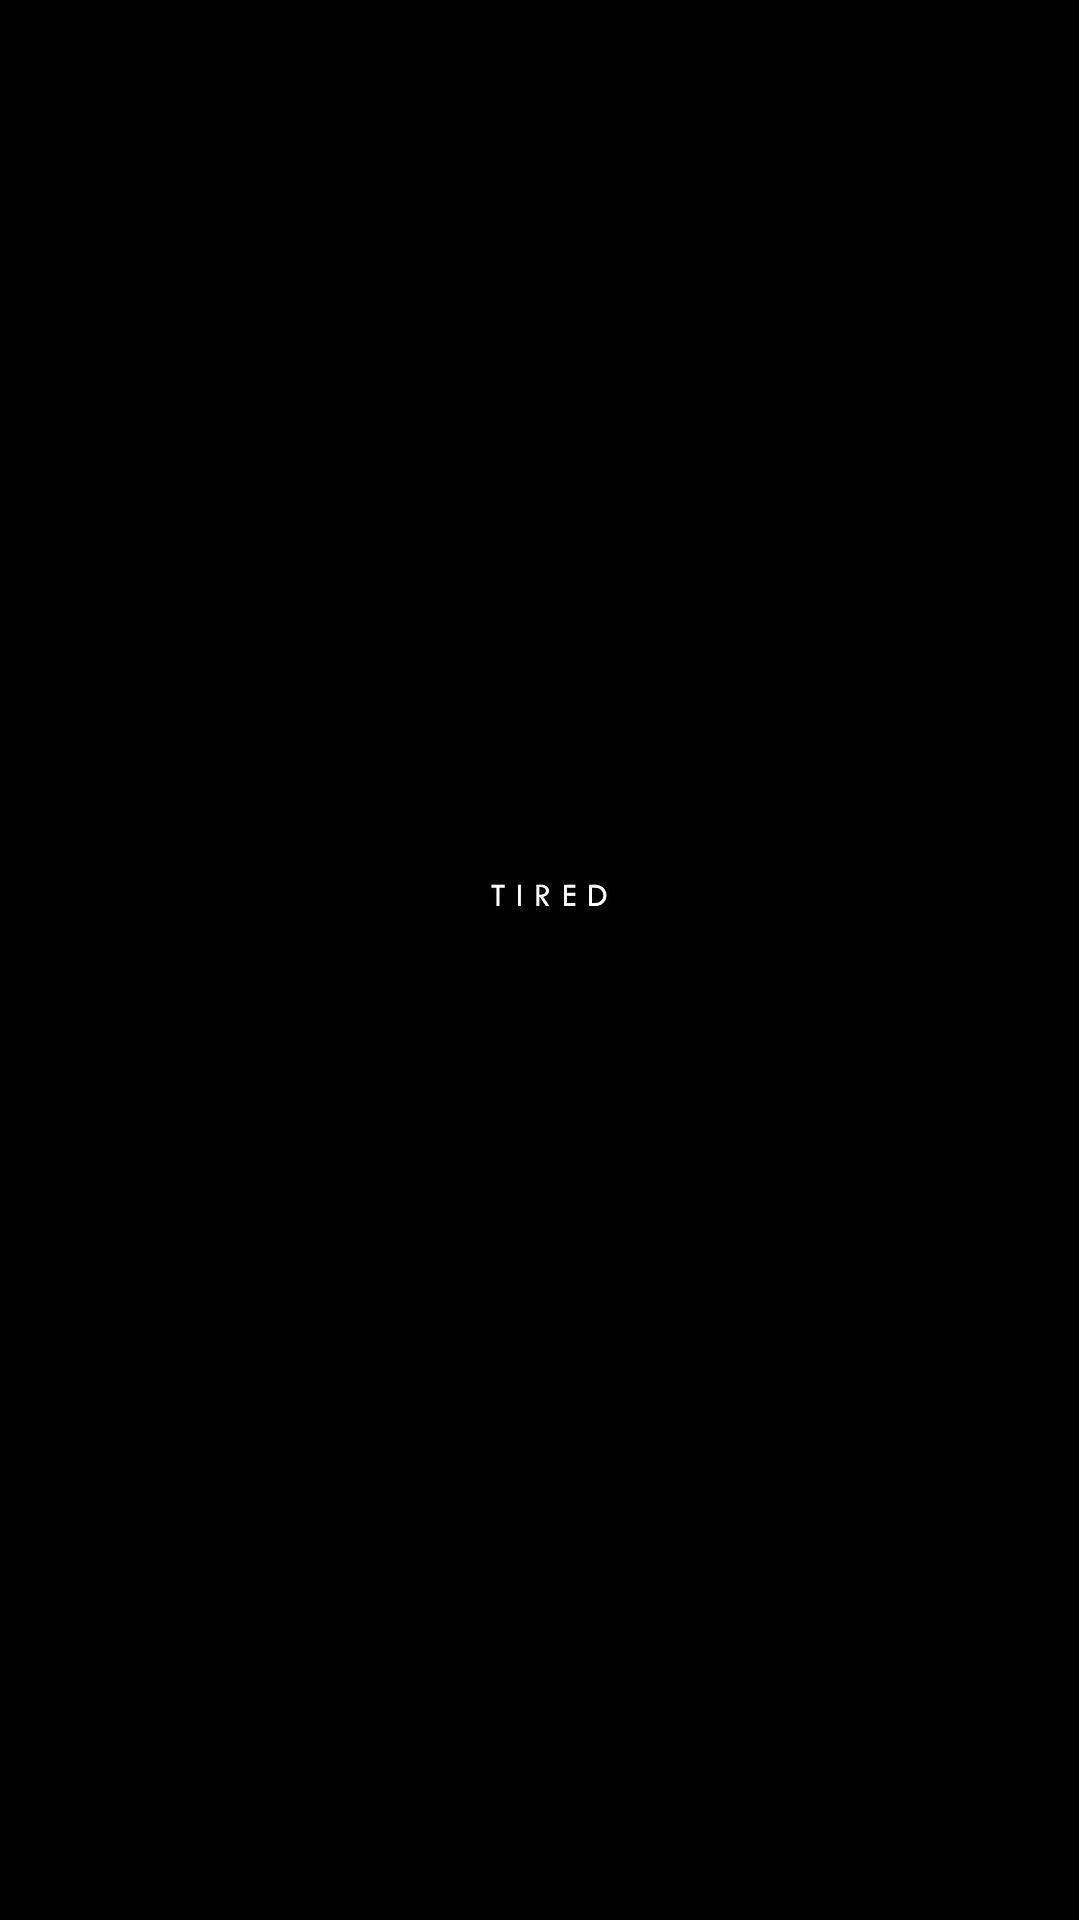 Simple Black Text Tired Wallpaper